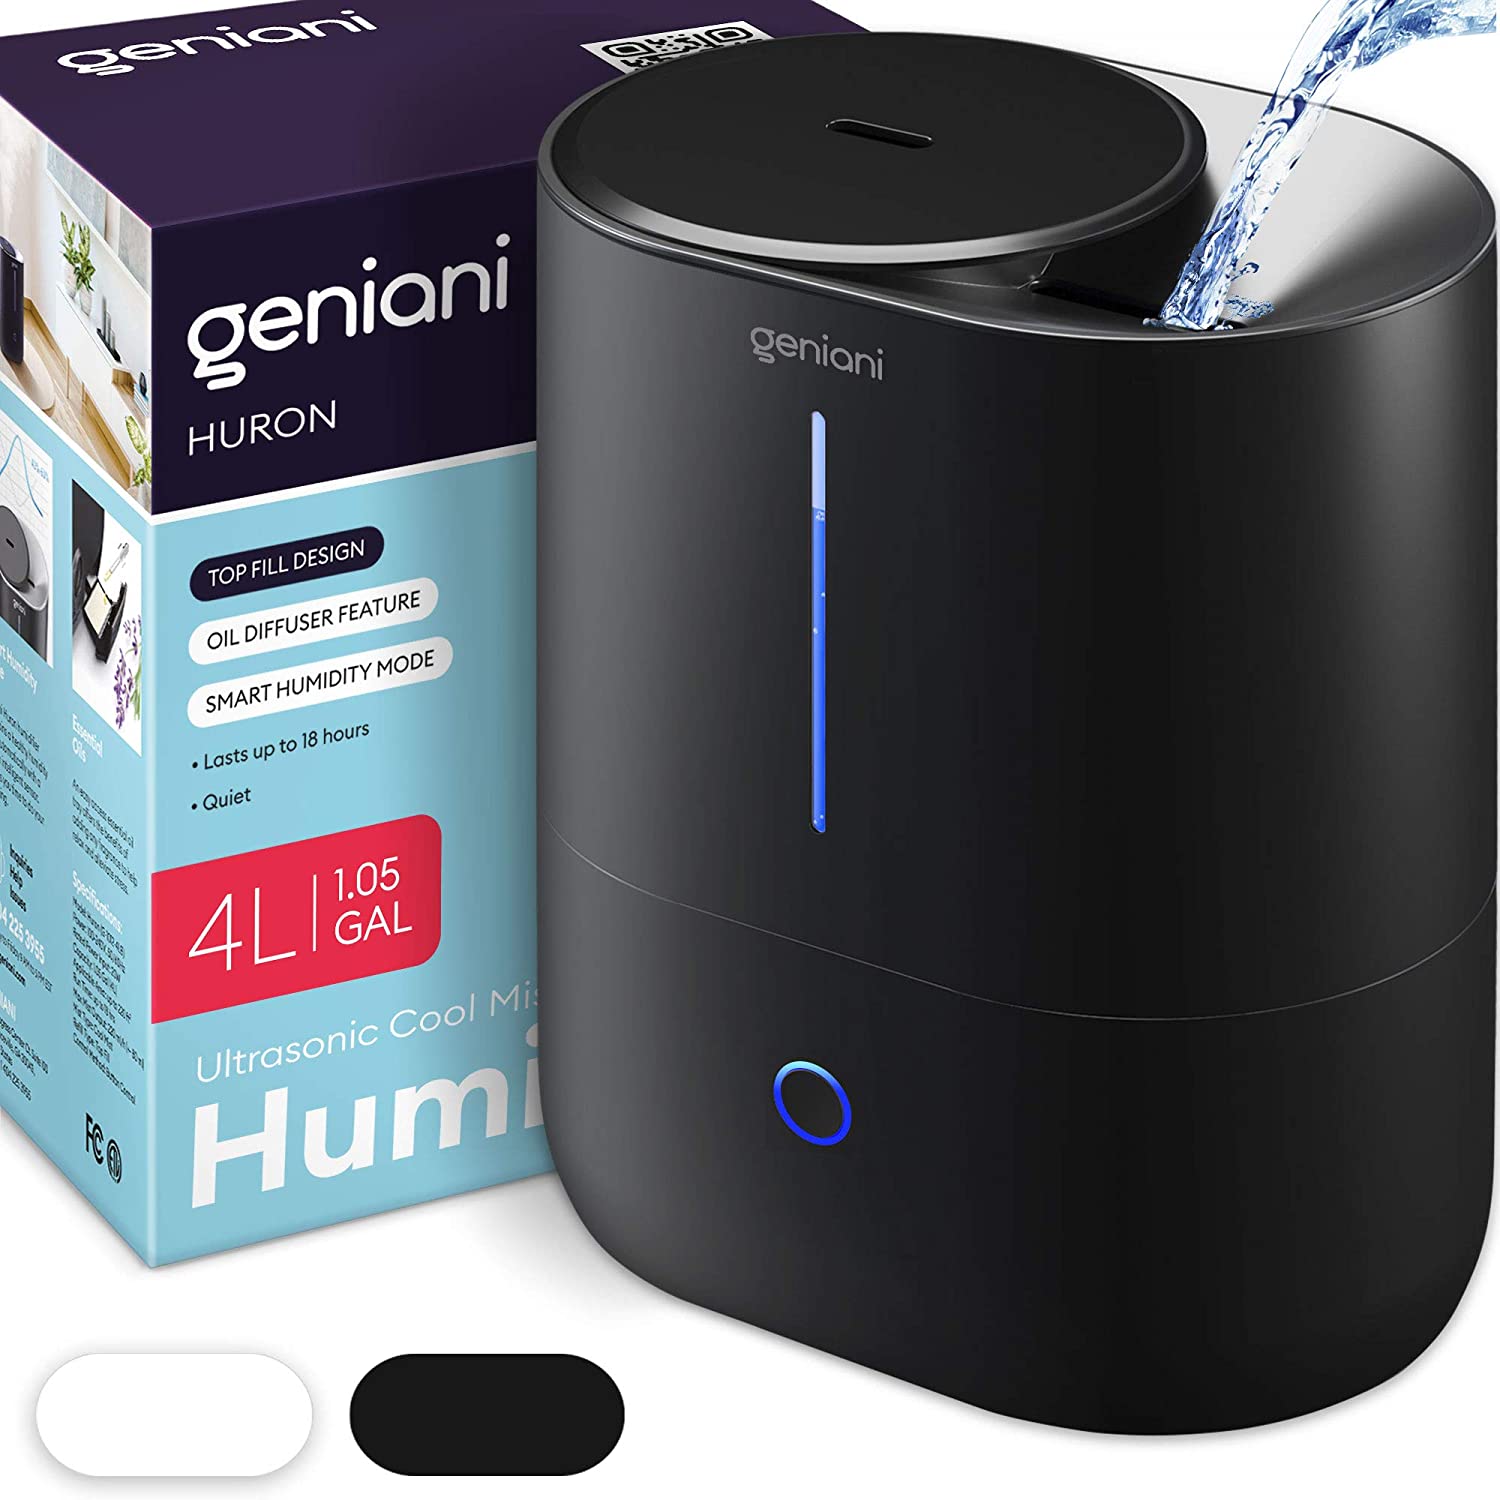 GENIANI Top Fill Cool Mist Humidifiers for Bedroom & Essential Oil Diffuser - Smart Aroma Ultrasonic Humidifier for Home, Baby, Large Room with Auto Shut Off, 4L Easy to Clean Water Tank (4L, Black)